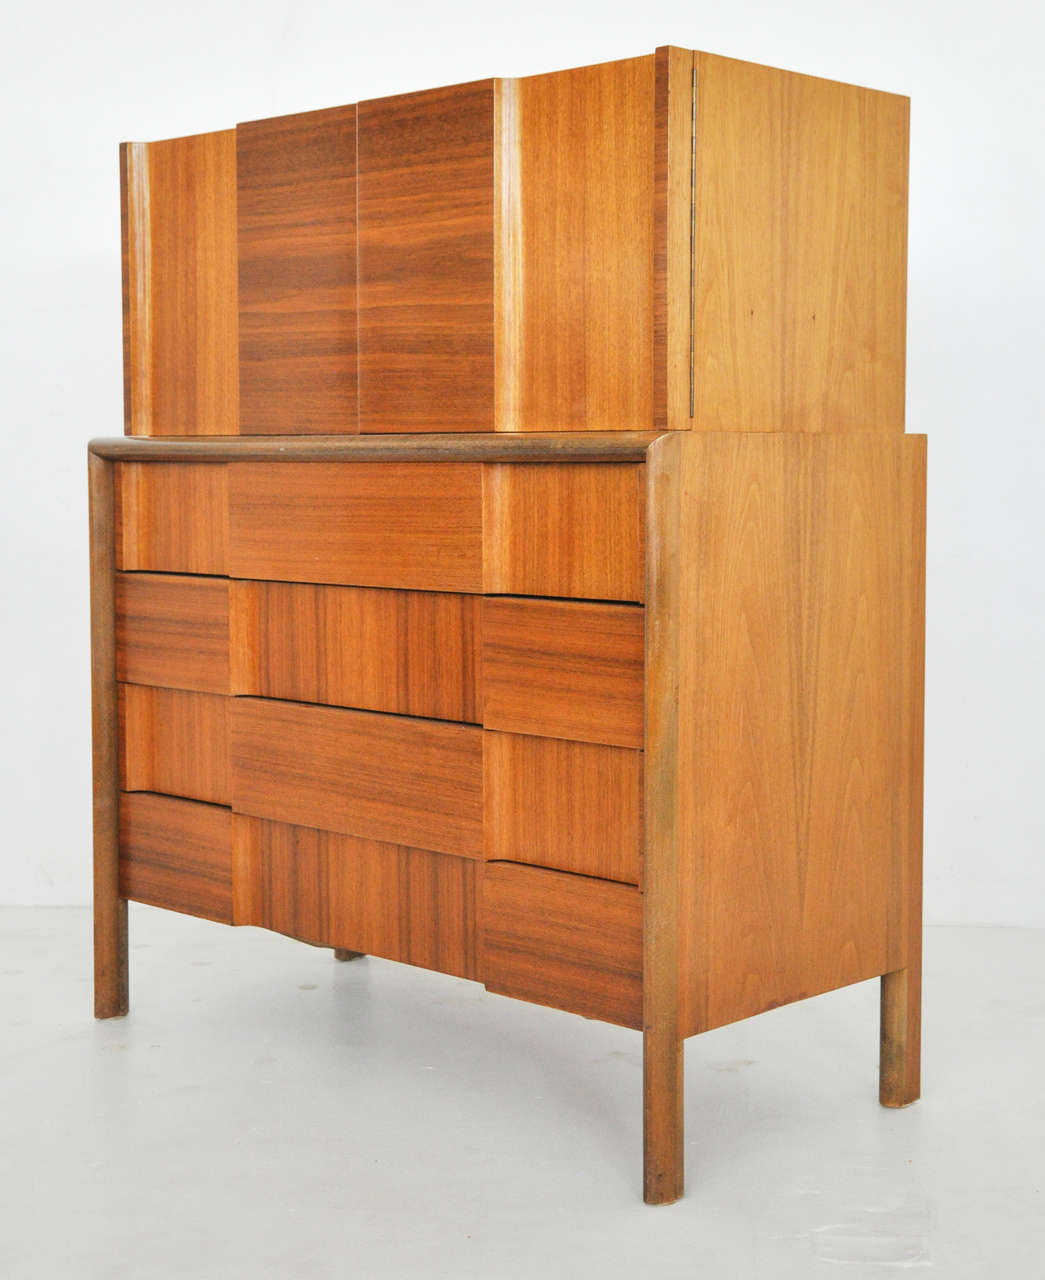 Highboy dresser designed by Edmond Spence. Made in Sweden. 

Other pieces from this seat are available.